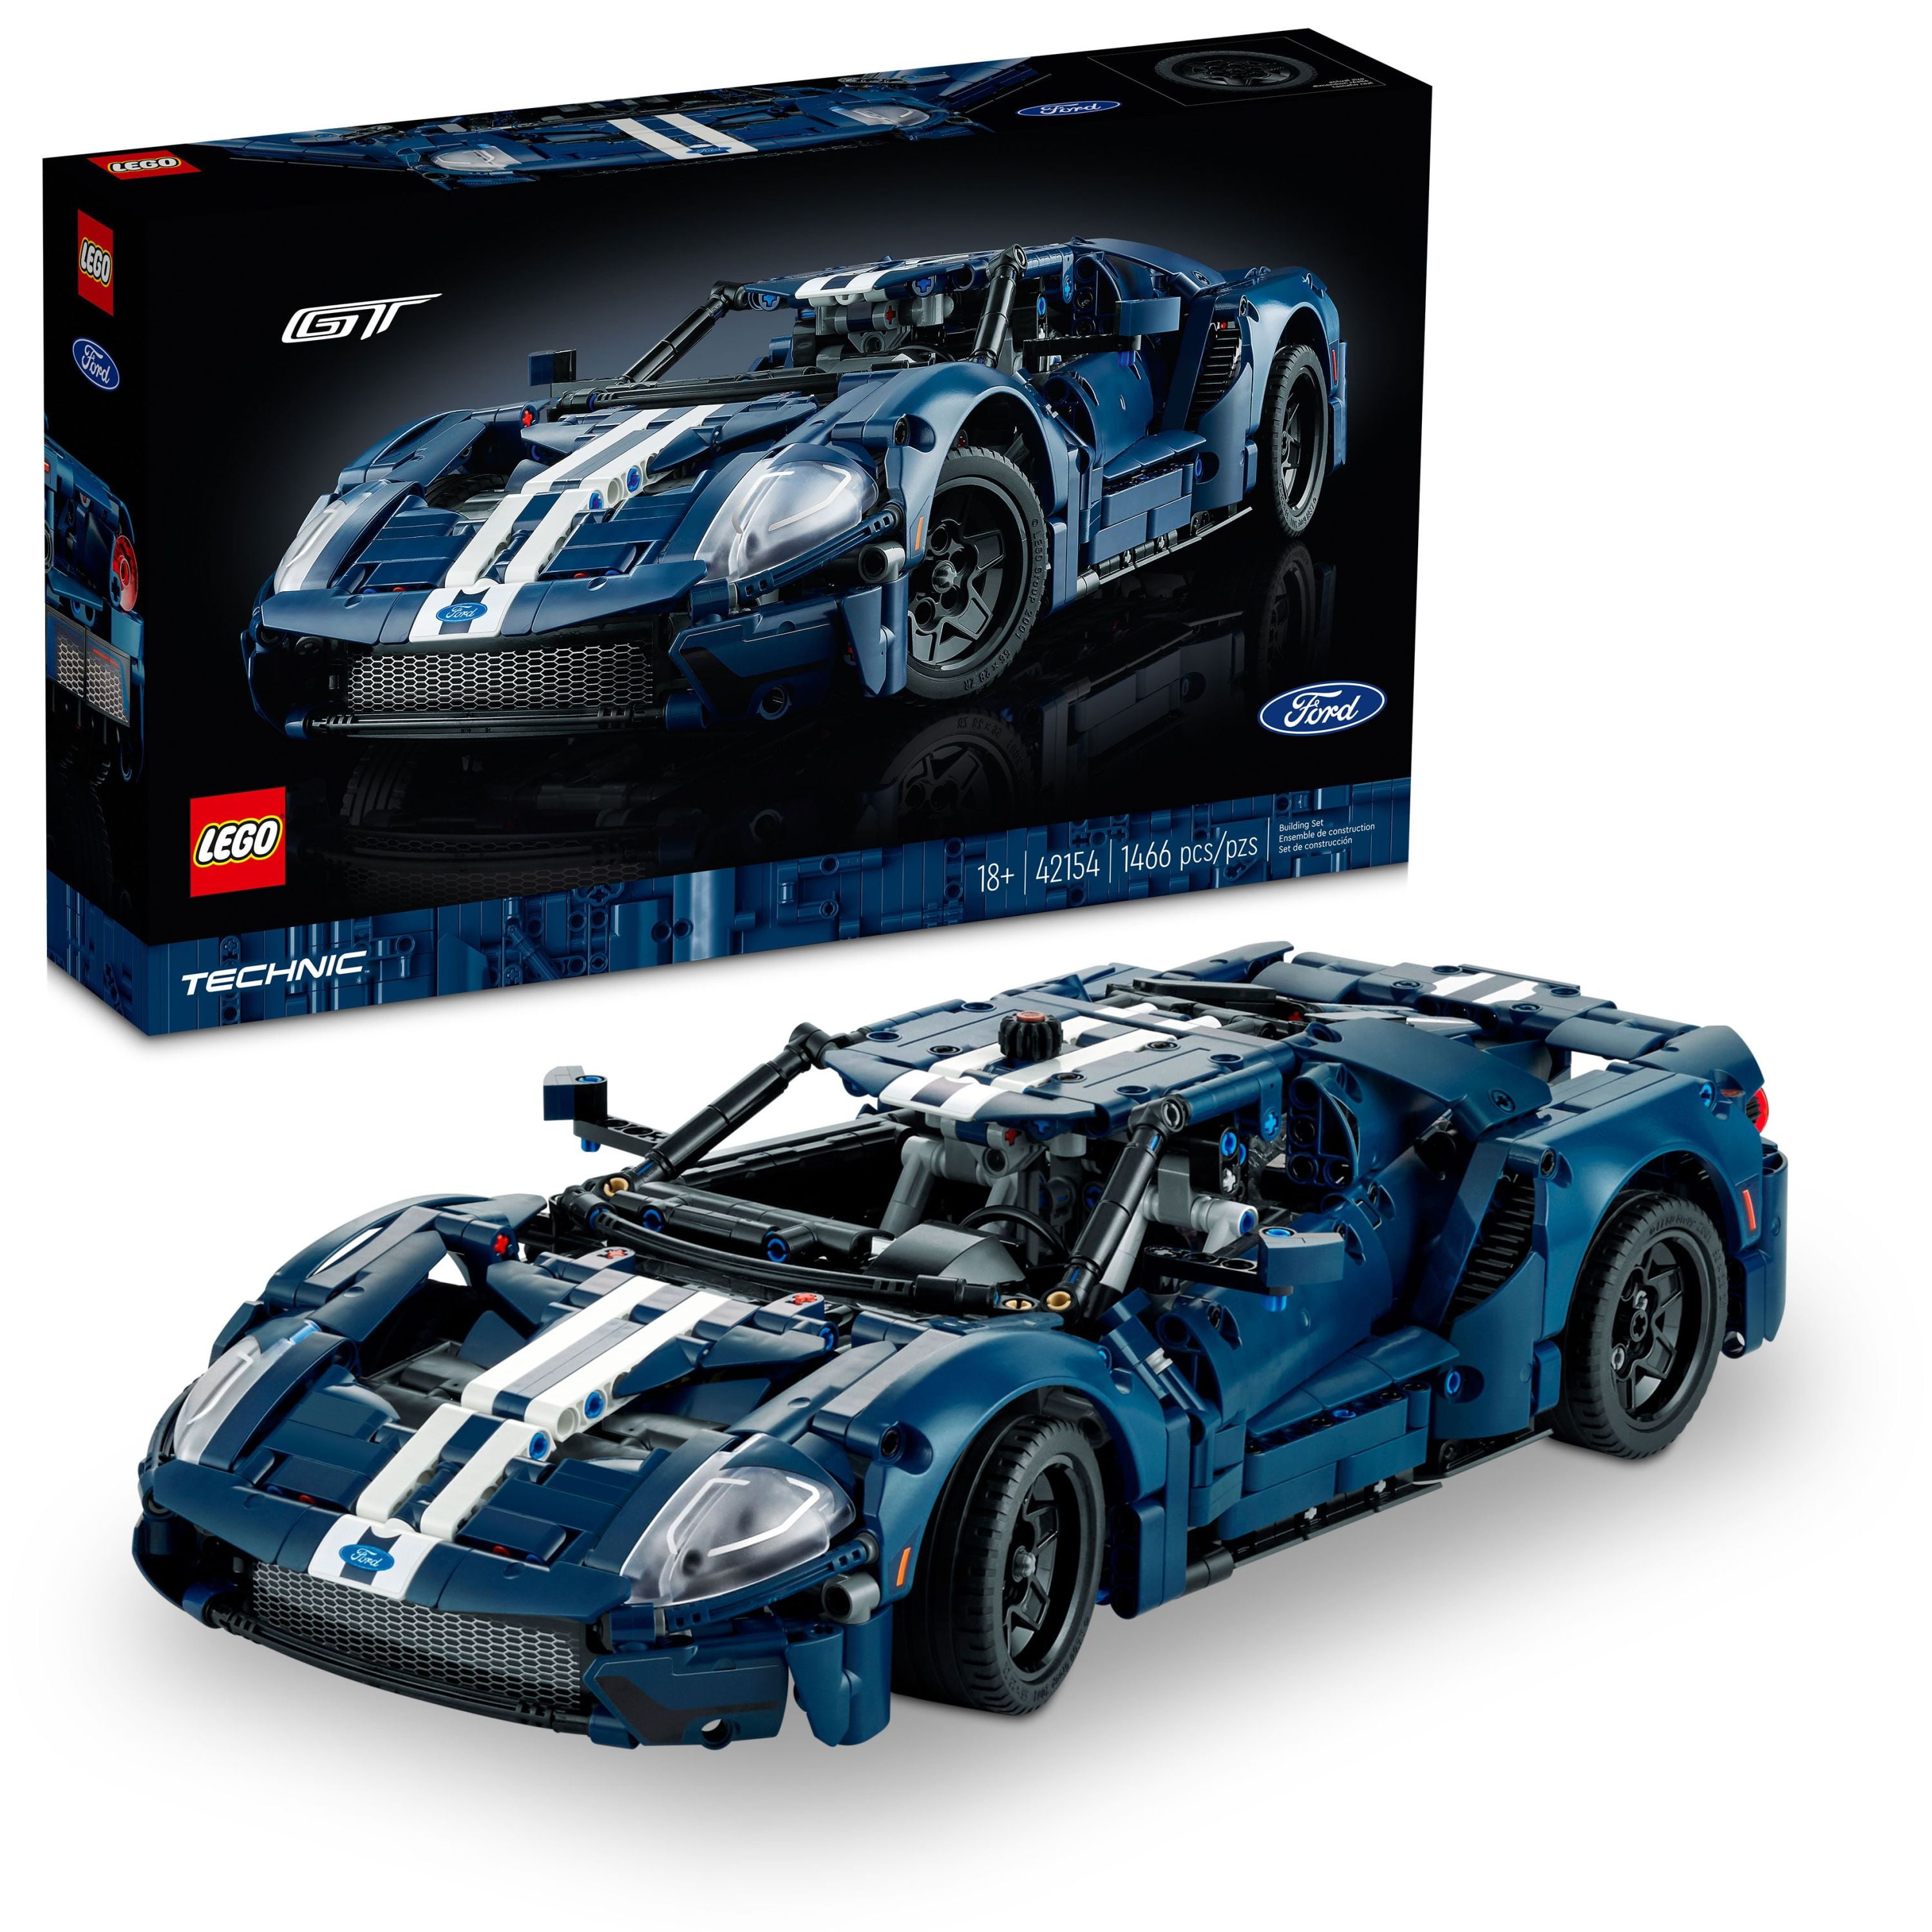 Technic 2022 Ford GT 42154 Car Model Kit for Adults to Build, 1:12 Scale Supercar, Collectible Set, Great Gift Idea - Walmart.com